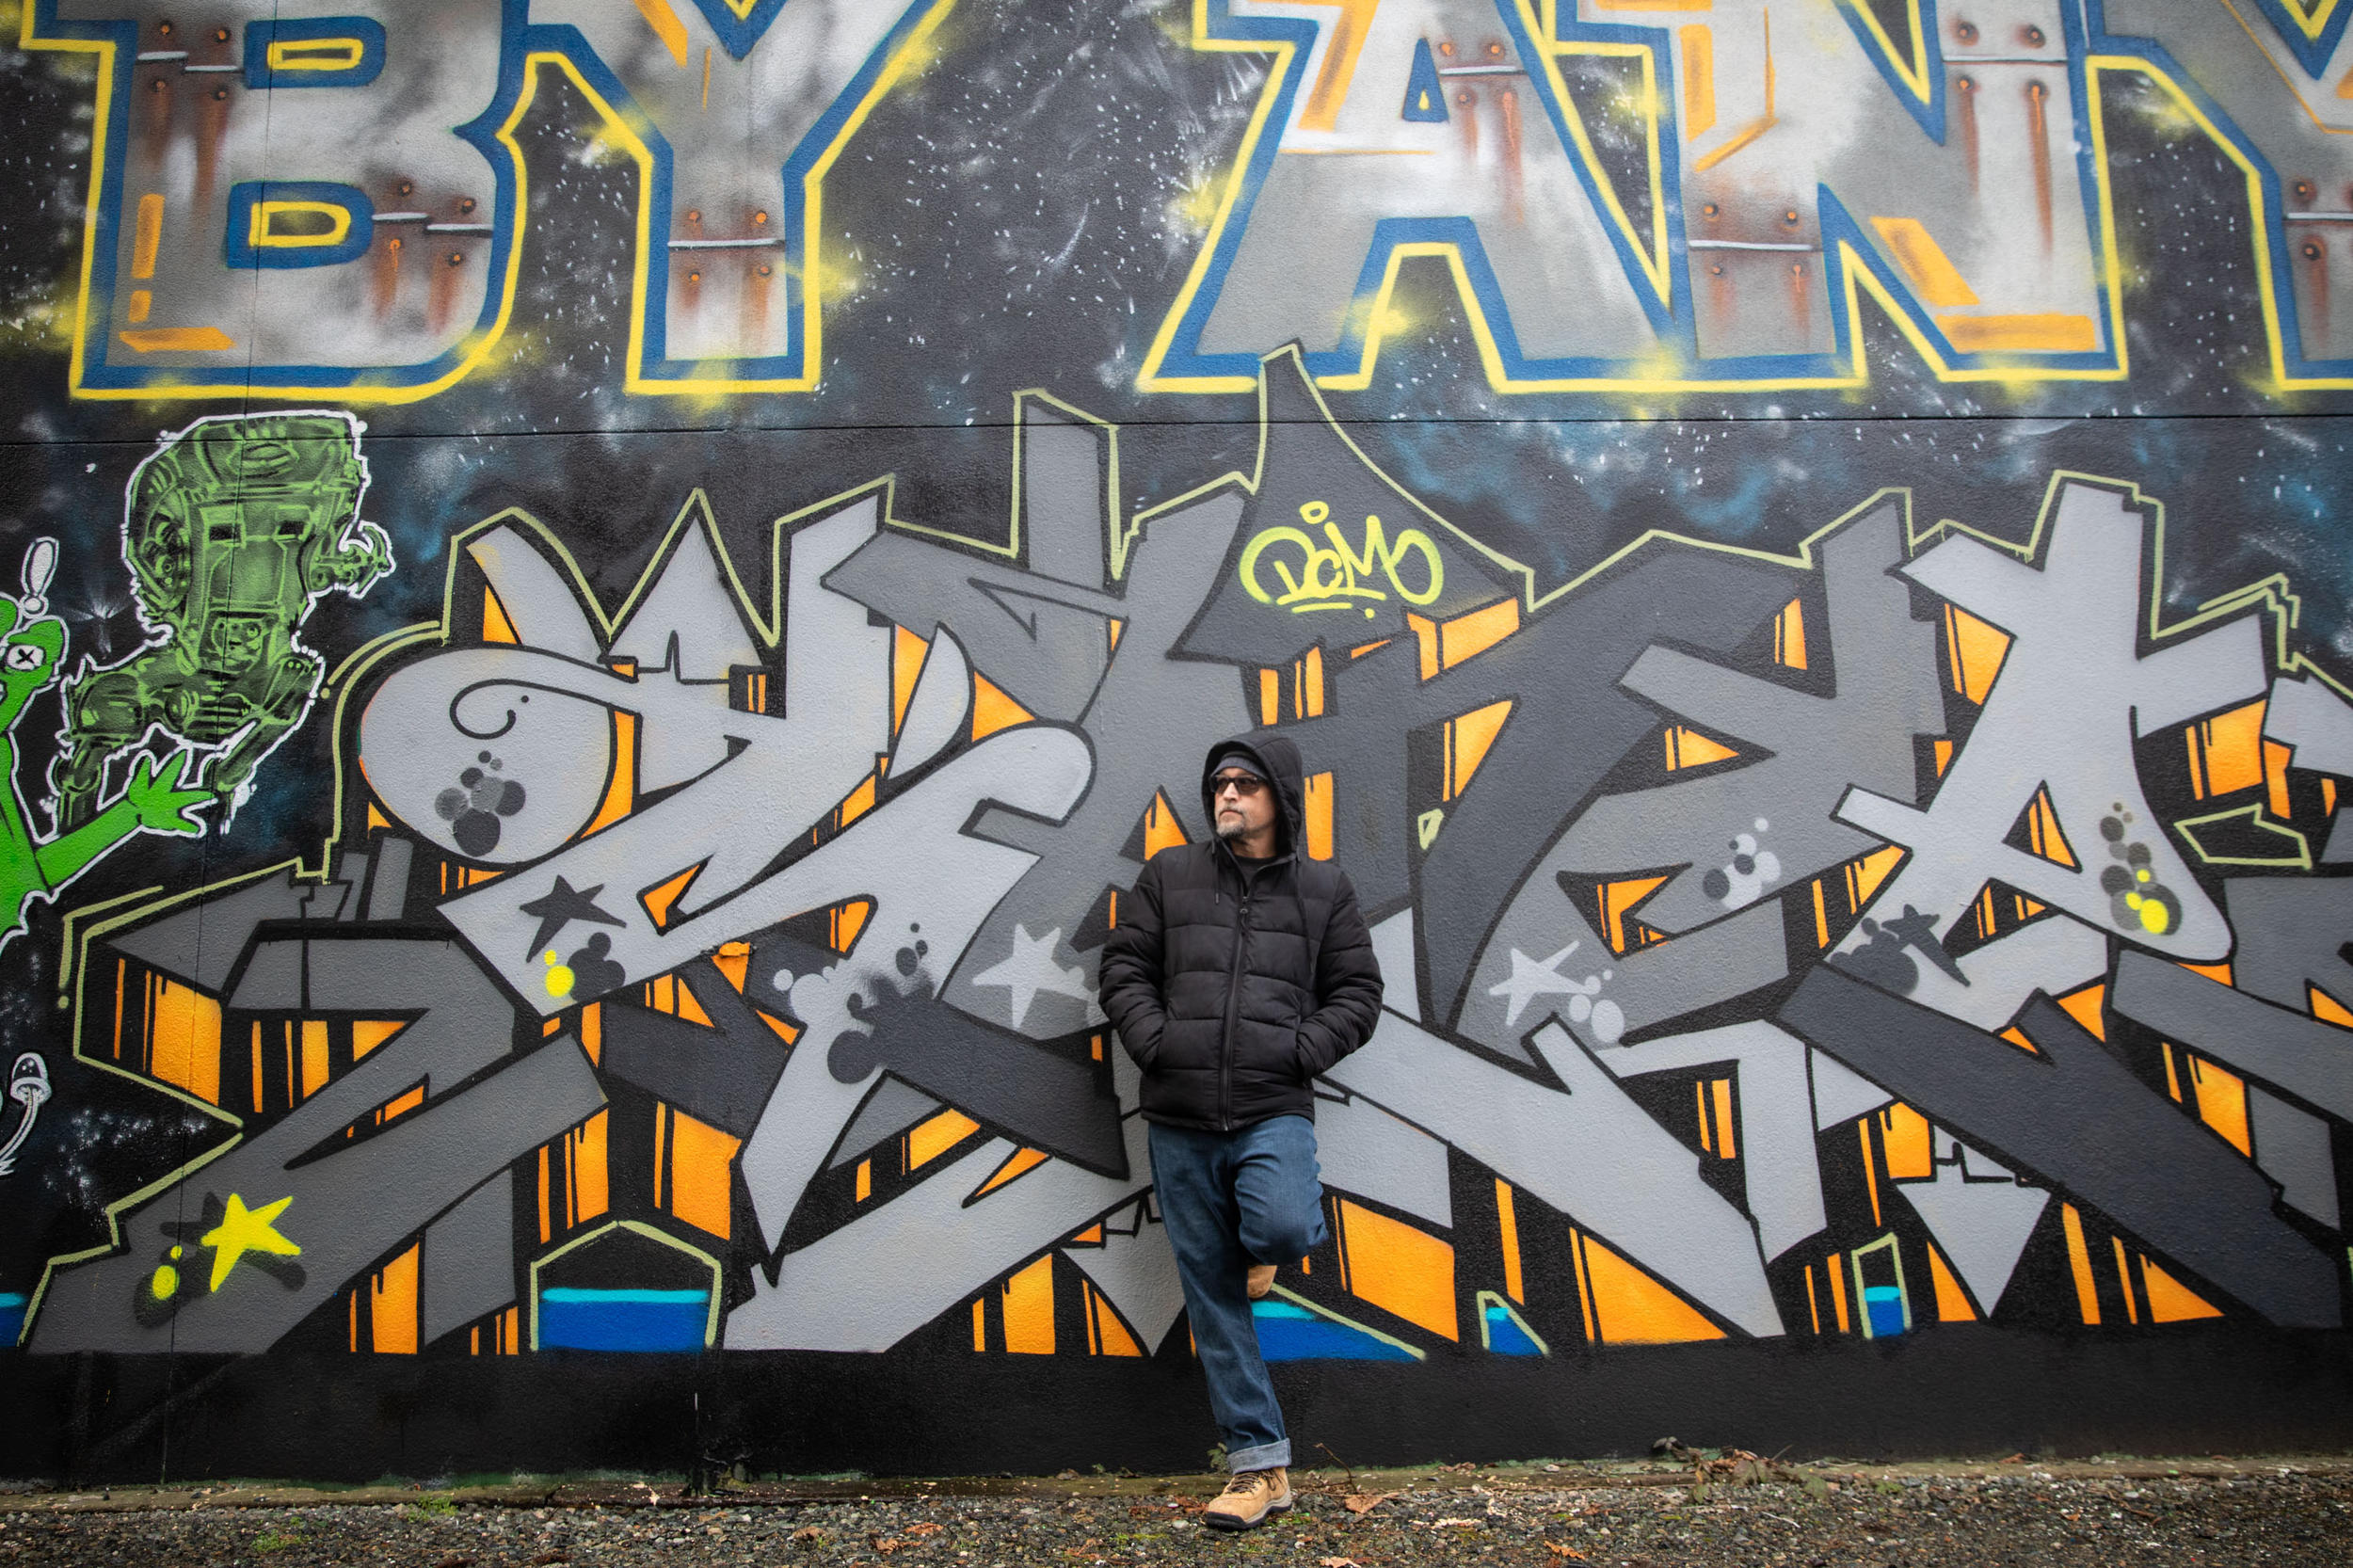 Can Seattle's mayor win his tough-on-graffiti game of tag? | Crosscut